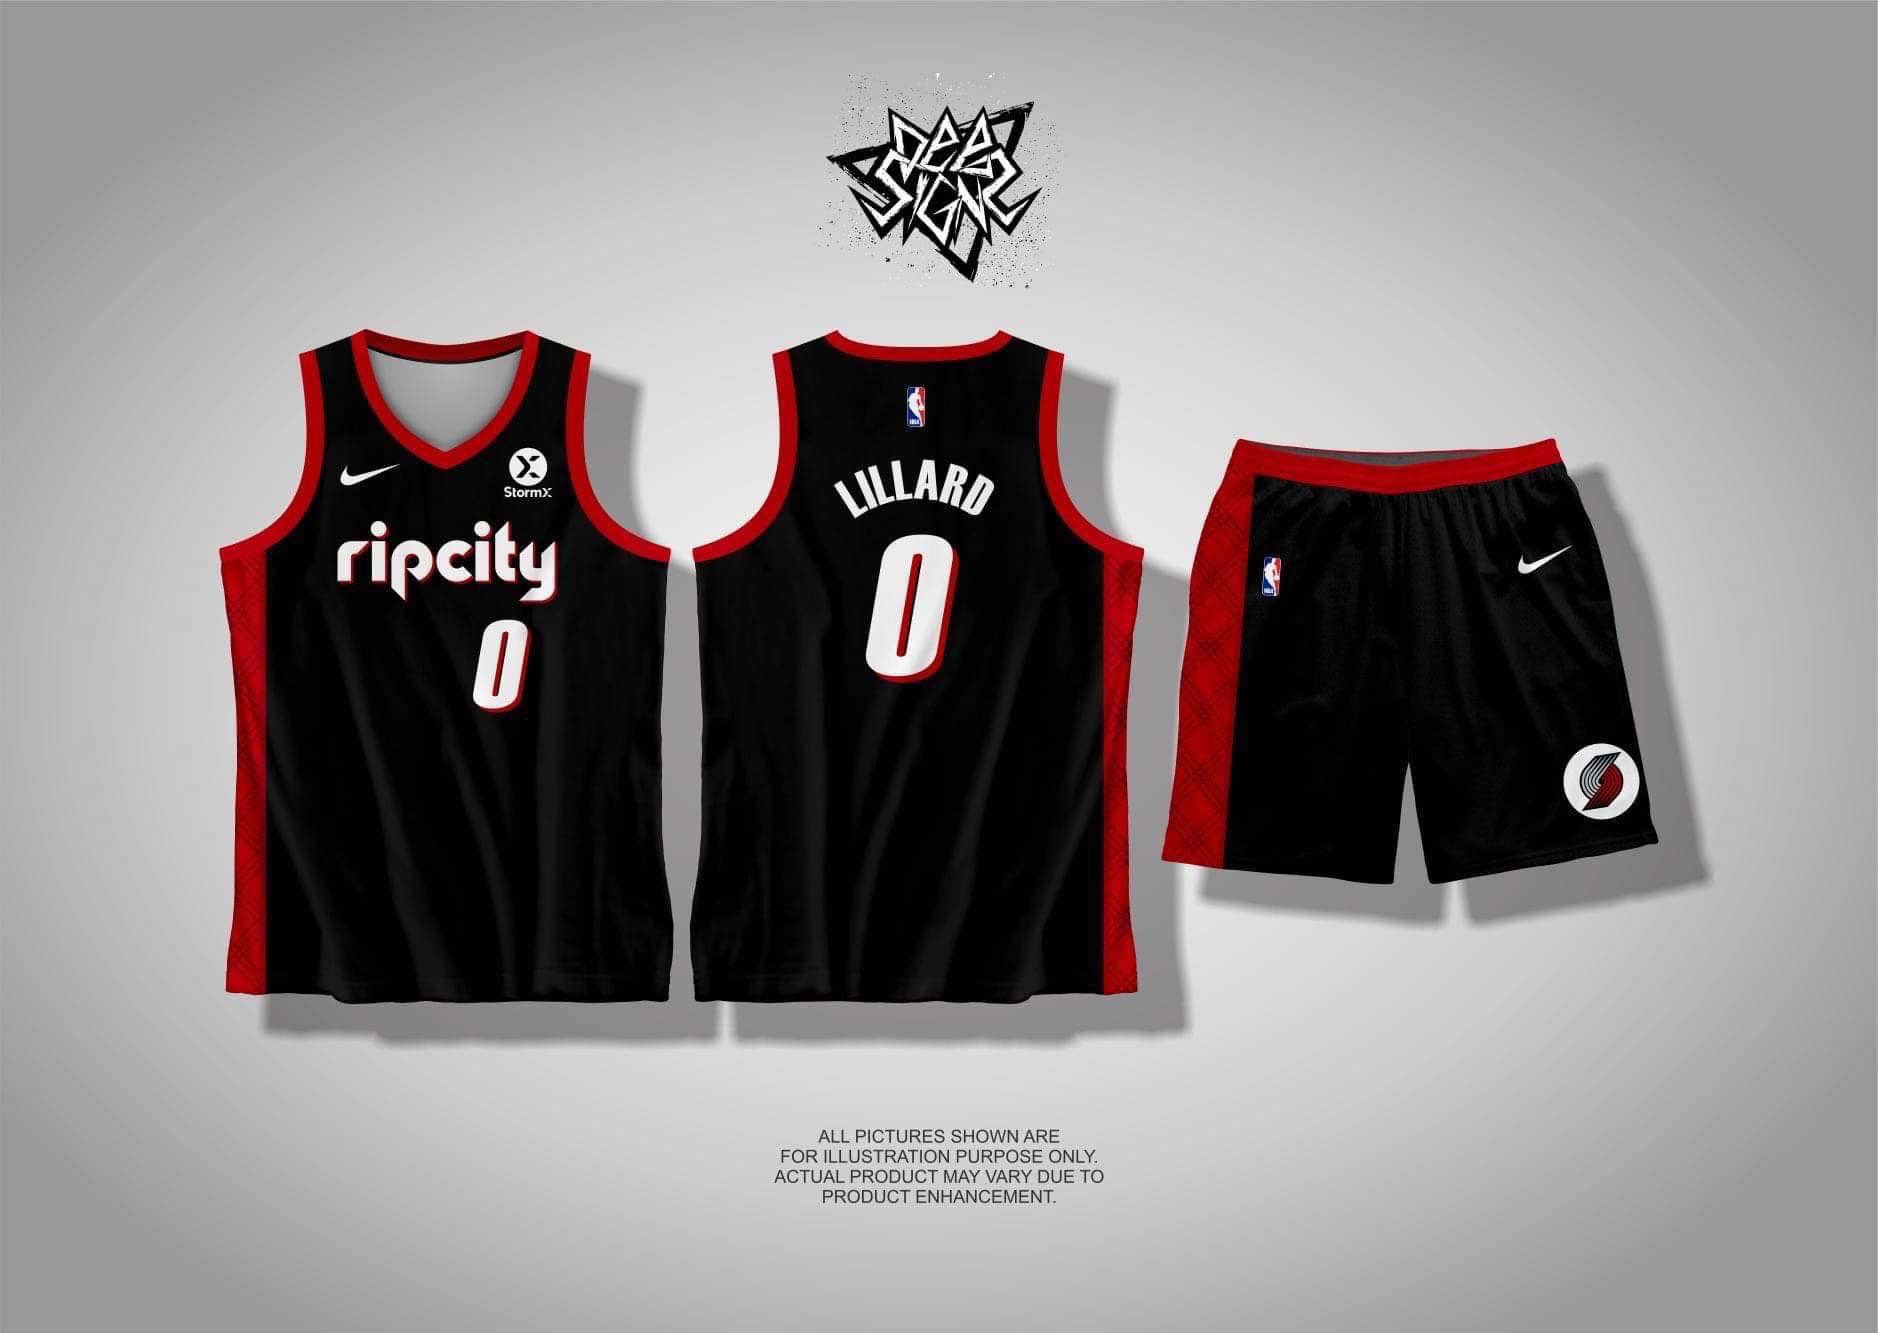 RIP CITY 01 2022 BASKETBALL JERSEY FULL SUBLIMATION HIGH QUALITY ...